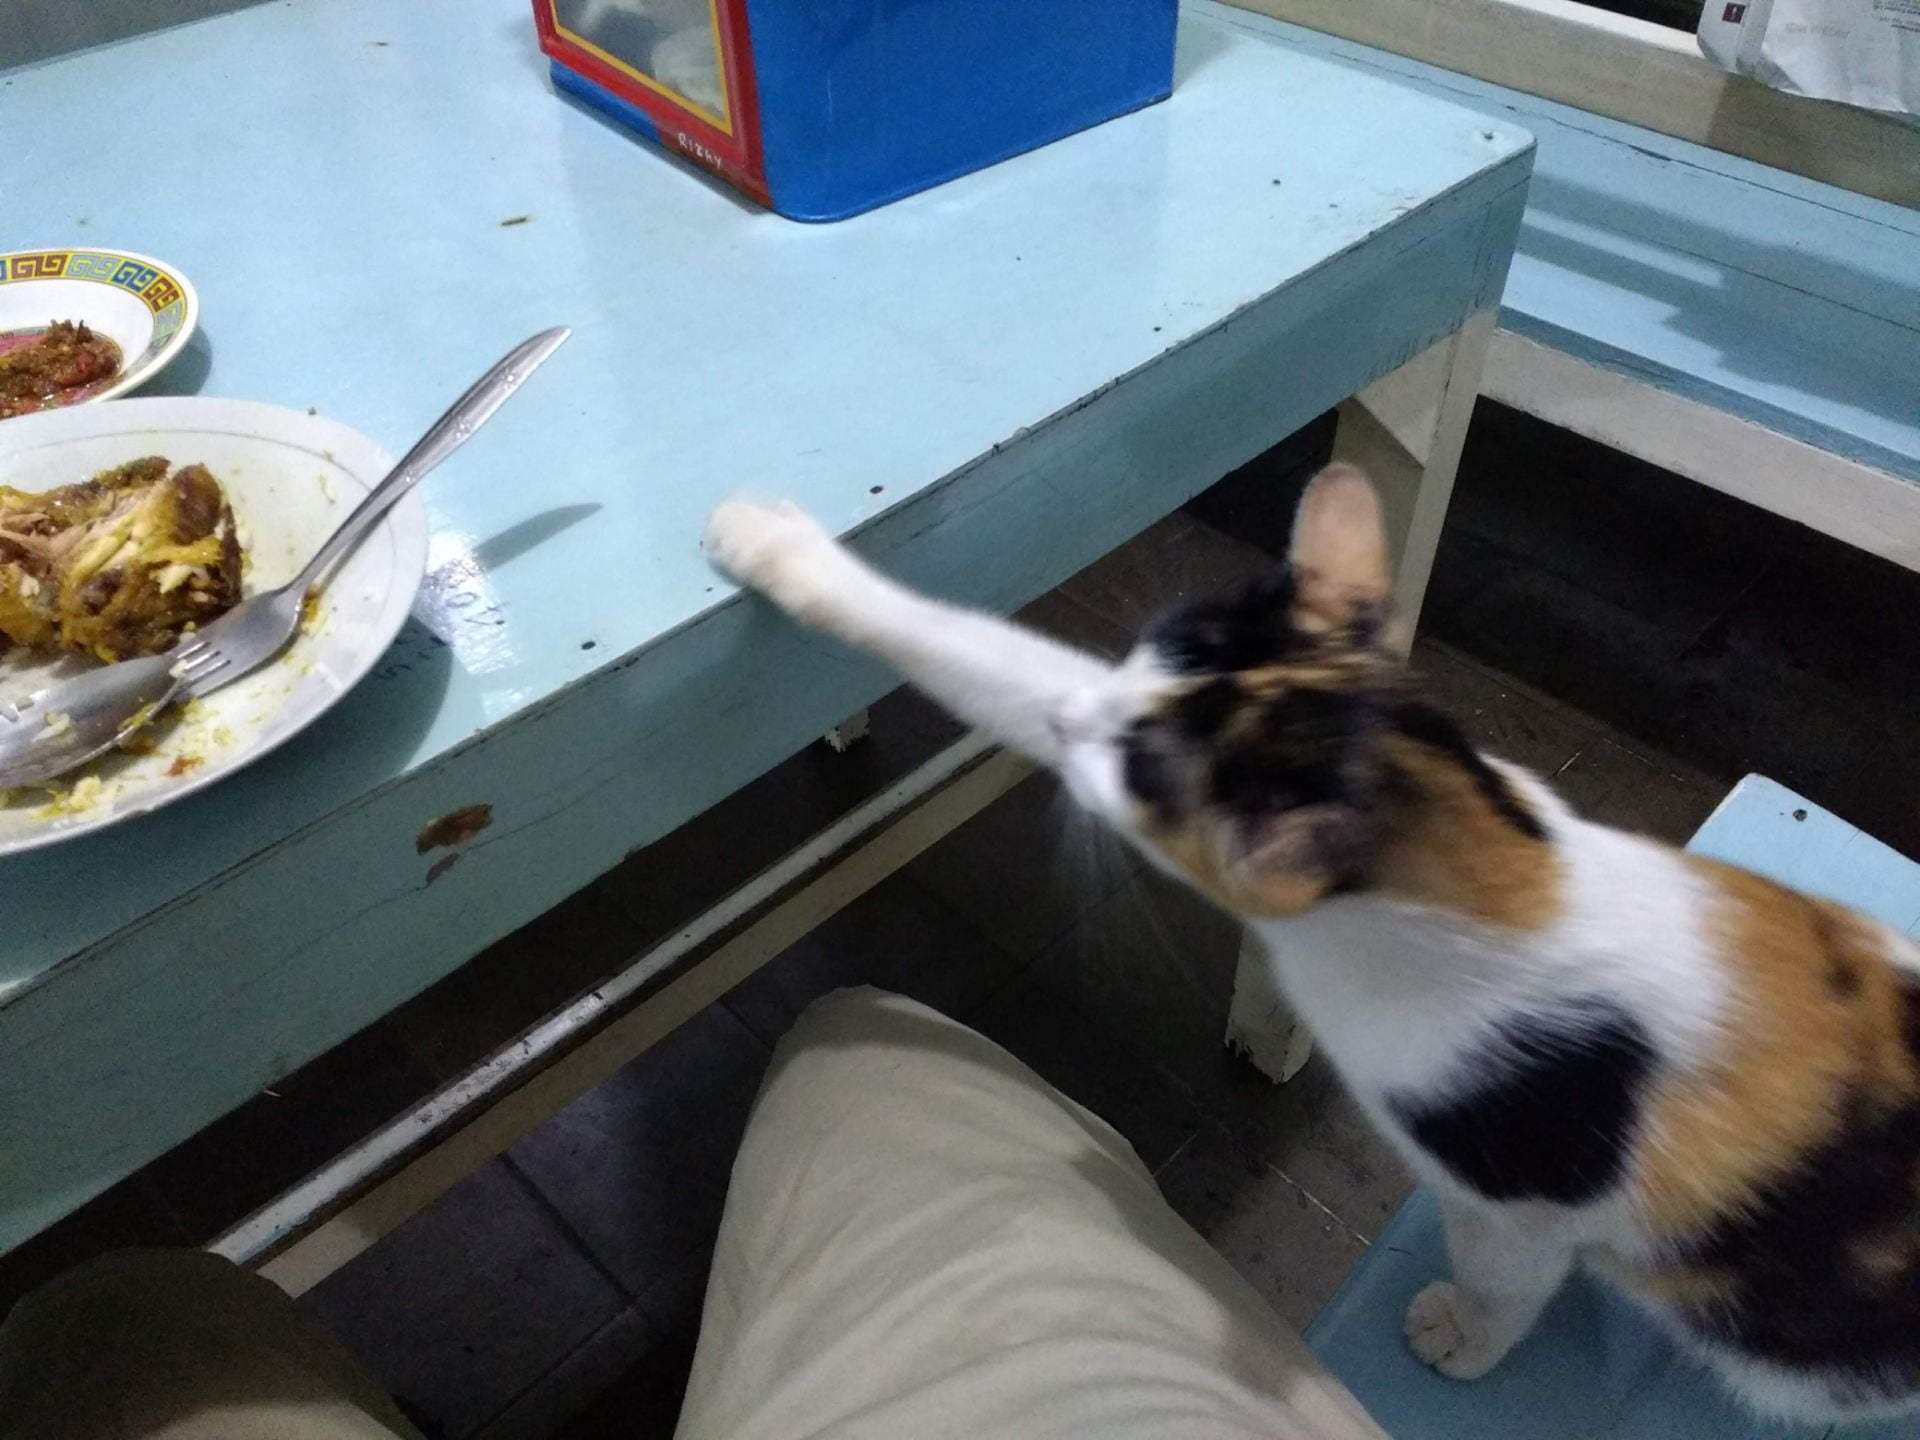 Cat sitting on a chair reaches for a plate on a nearby table